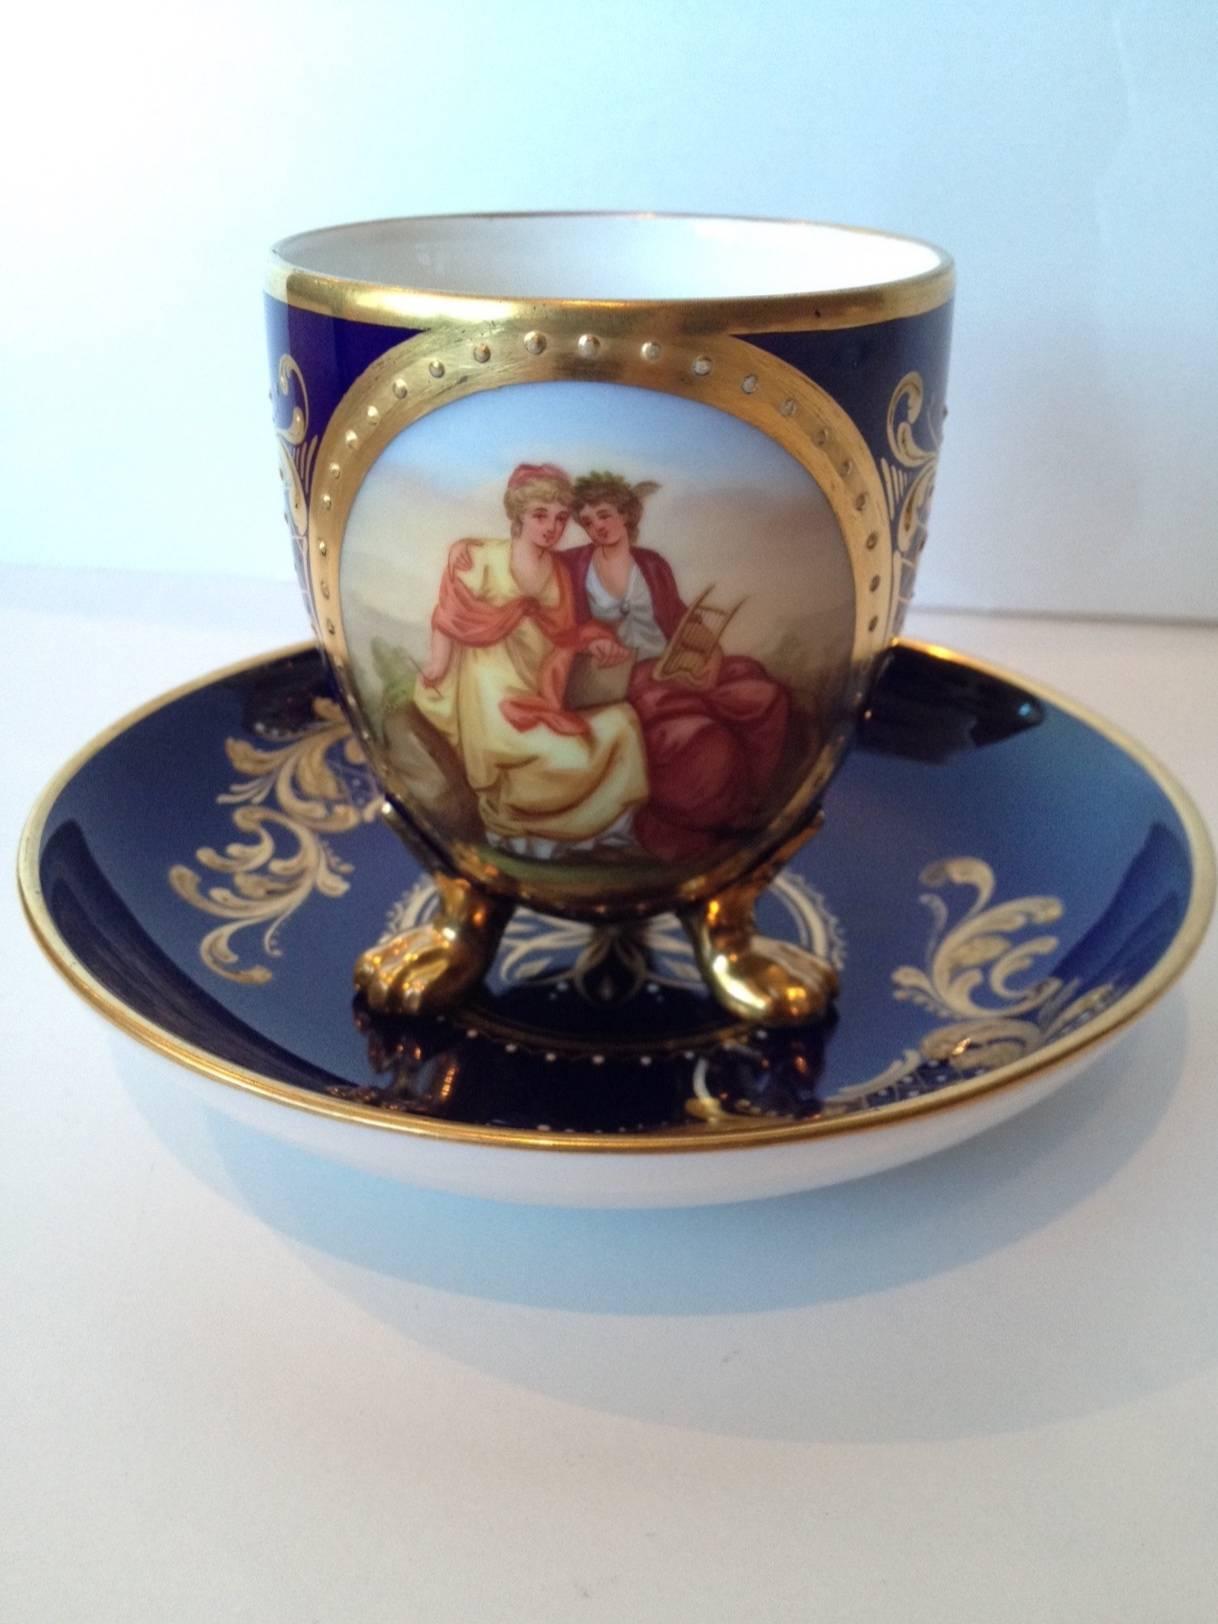 It's a nice one that's for sure, lovely hand-painted scene to the center and very richly gilded in raised paste, with enamel dotting highlights. Vienna mark to the bottom of the saucer. In excellent condition with a minor amount of gilt